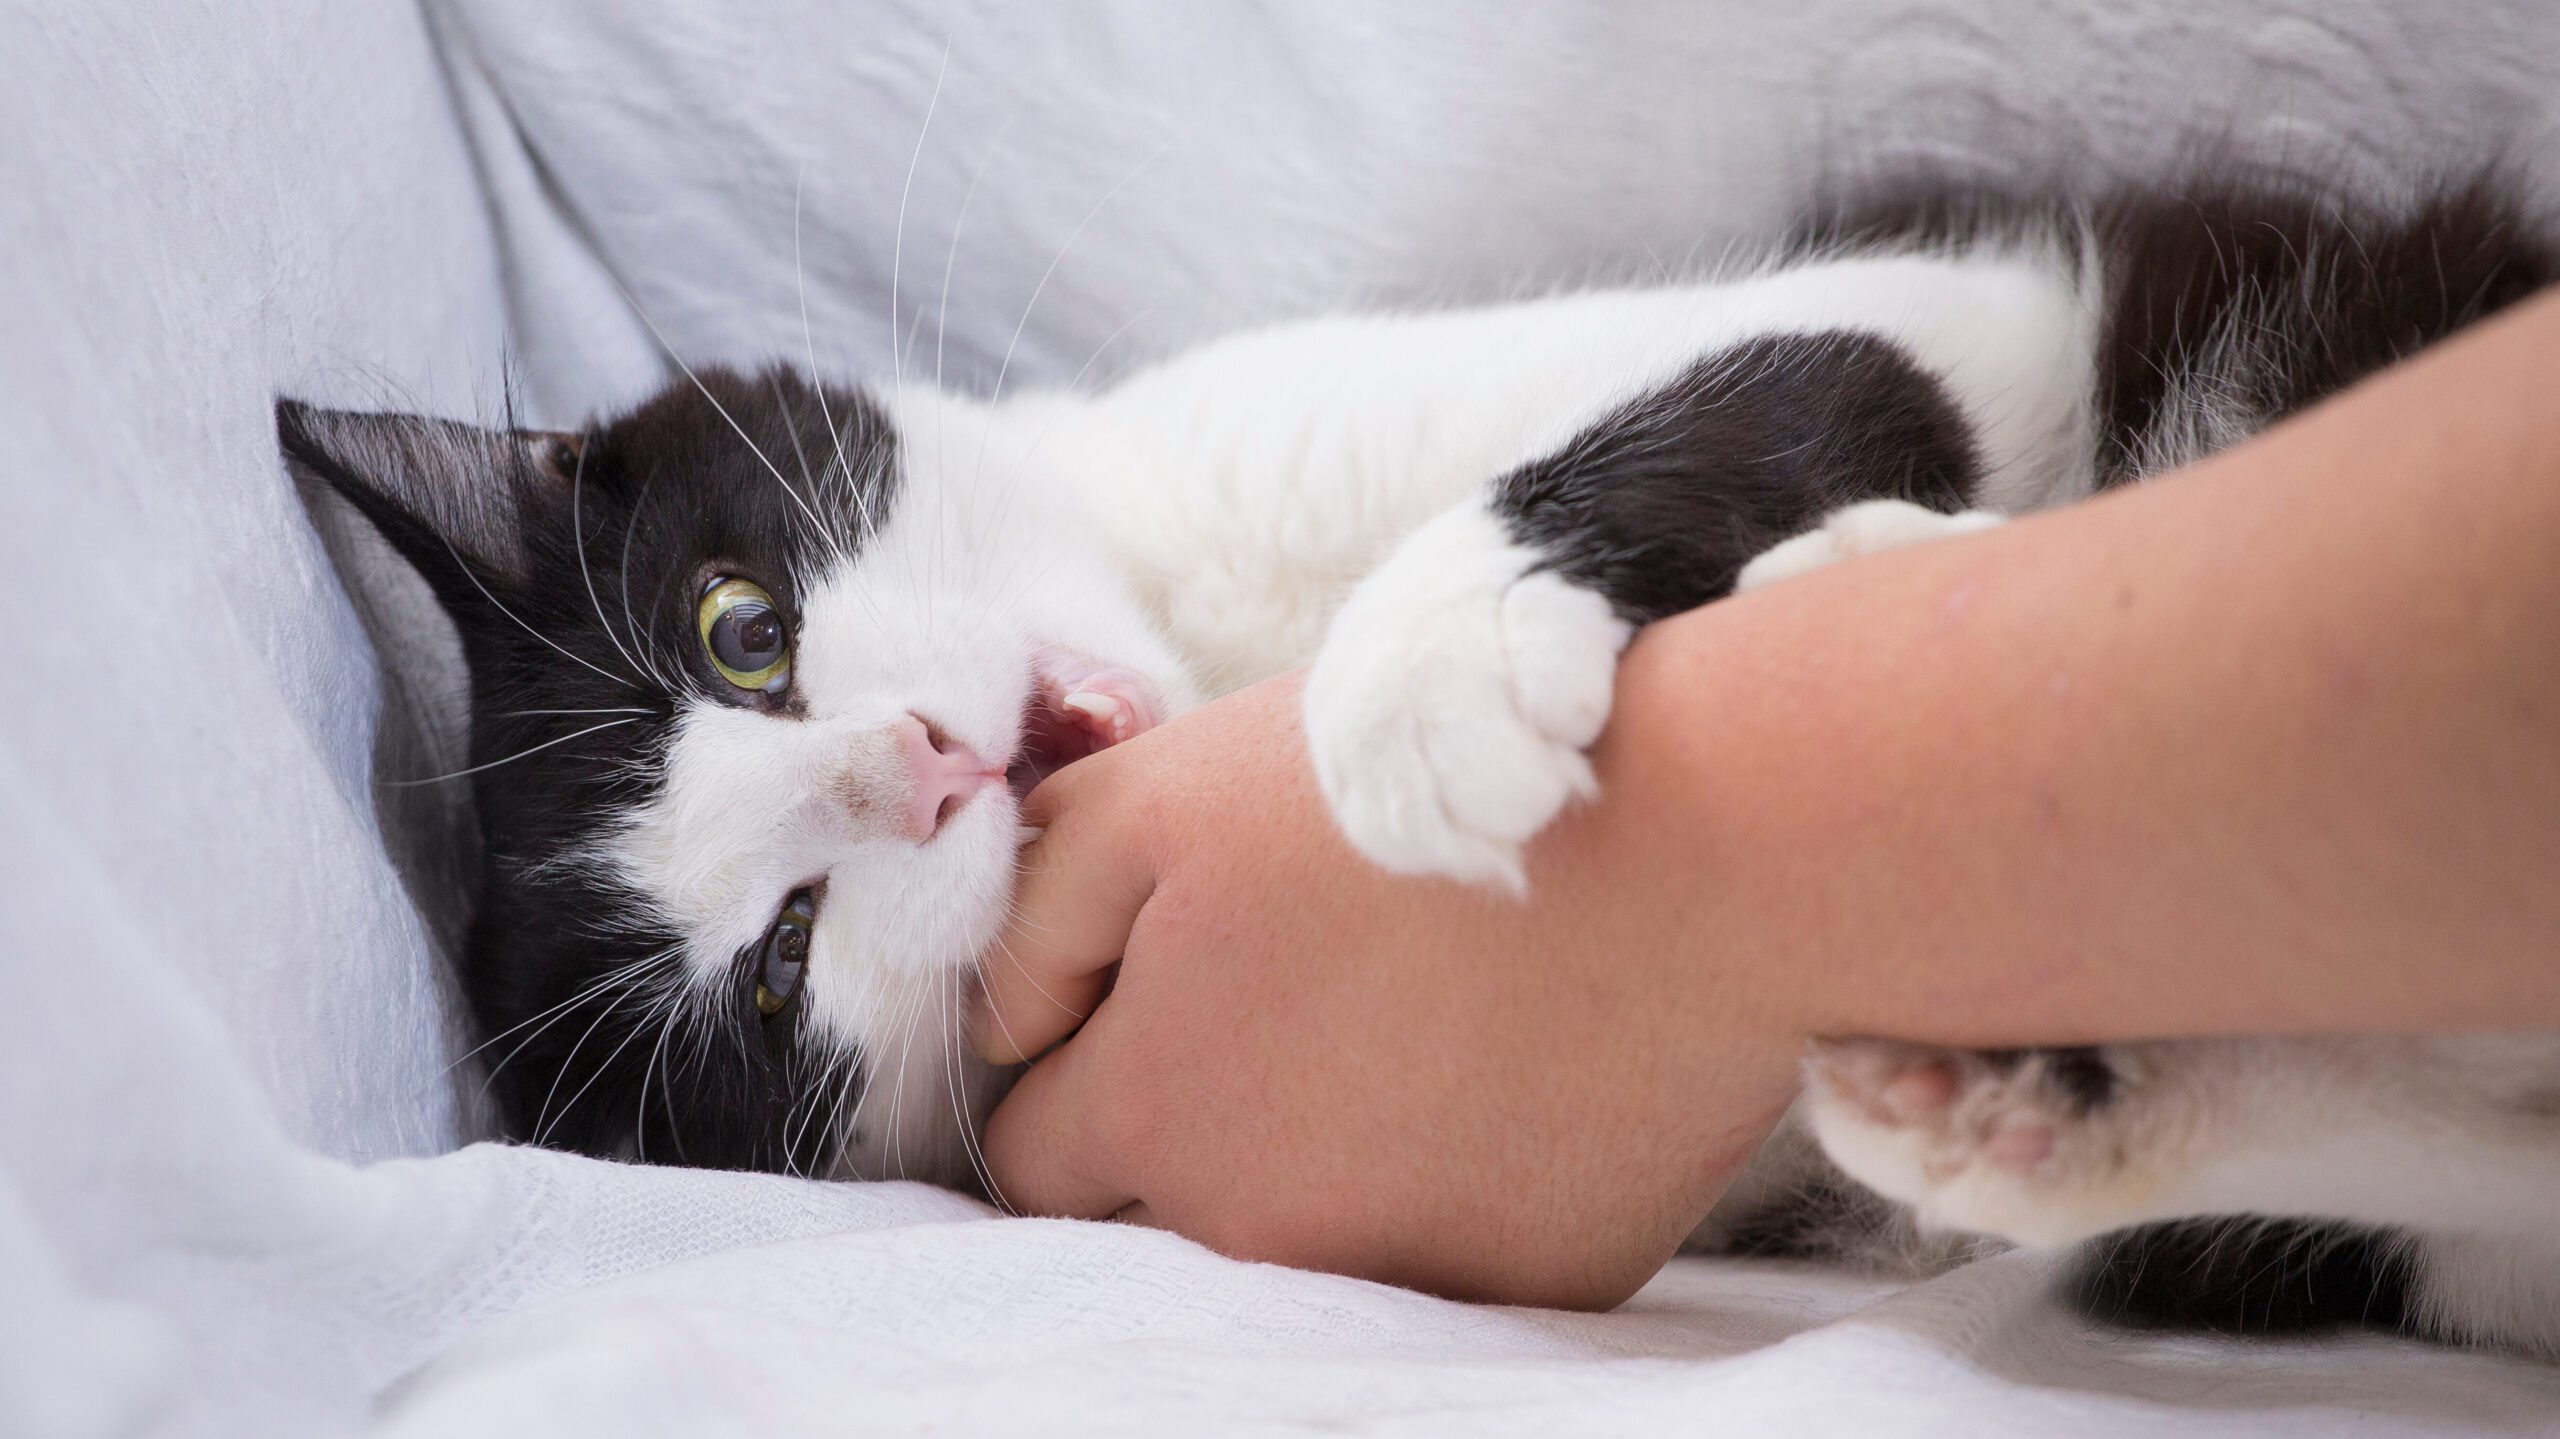 Why is my cat biting me? There could be a few reasons why your cat tries to bite you when you pet them.